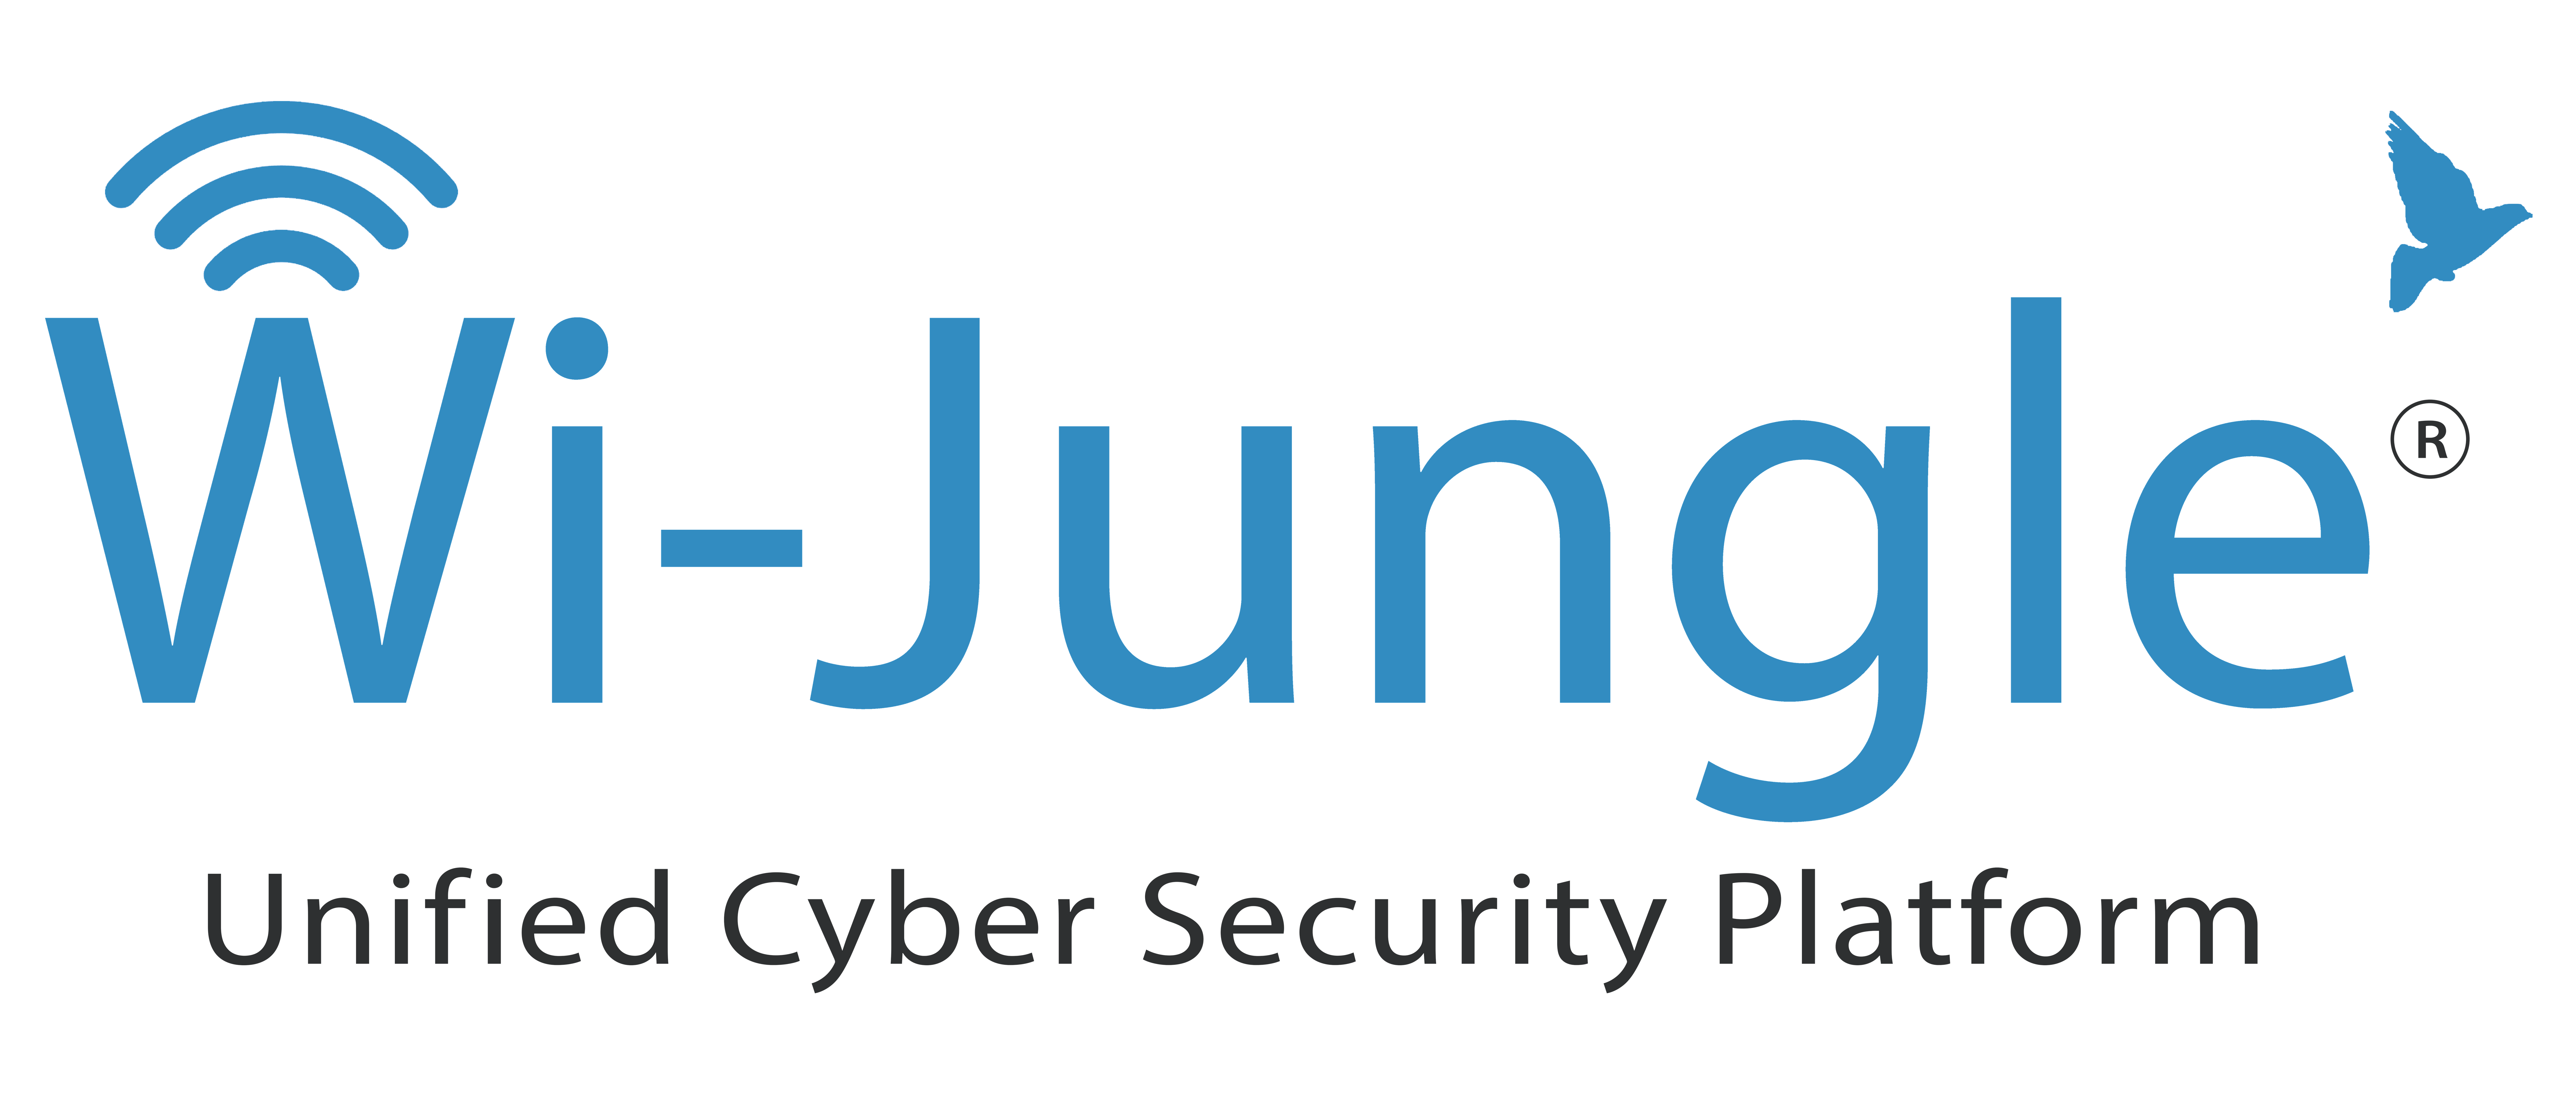 WiJungle : World's First Unified Cyber Security Platform